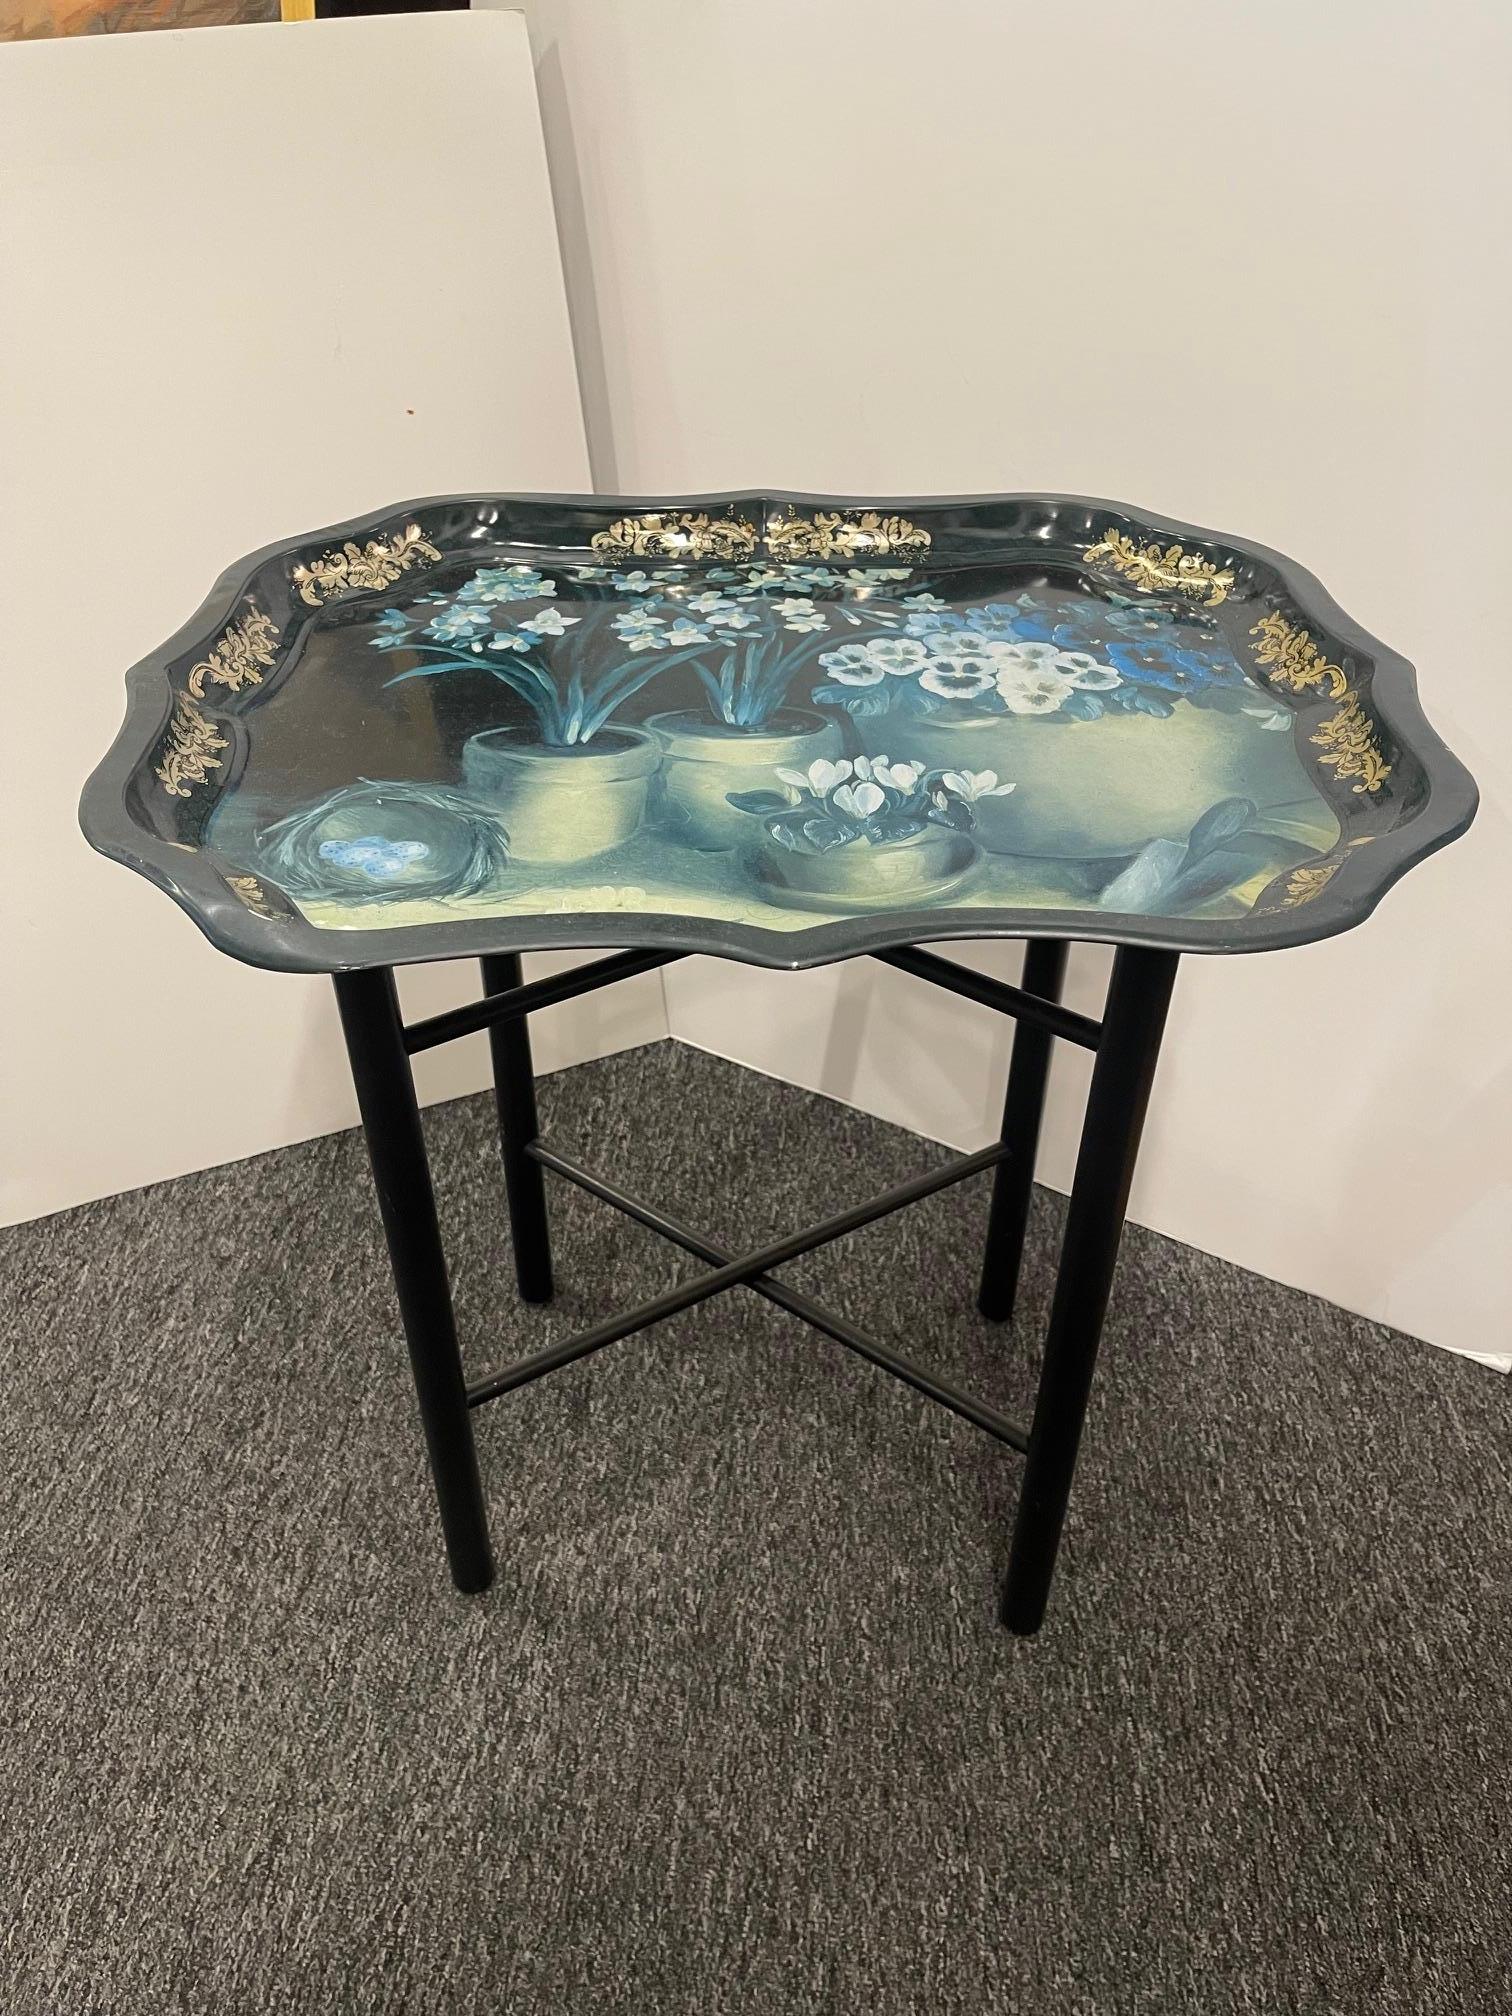 English Tole Tray Table with Floral Design, 20th Century In Good Condition For Sale In Savannah, GA